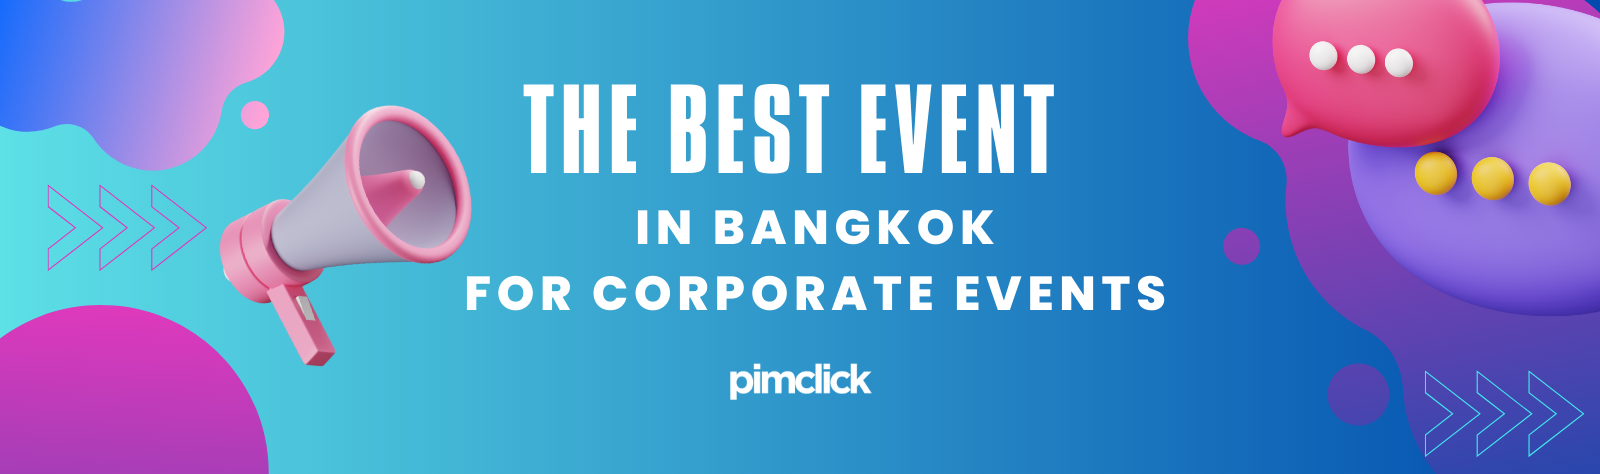 The Best Event Venues in Bangkok for Corporate Events